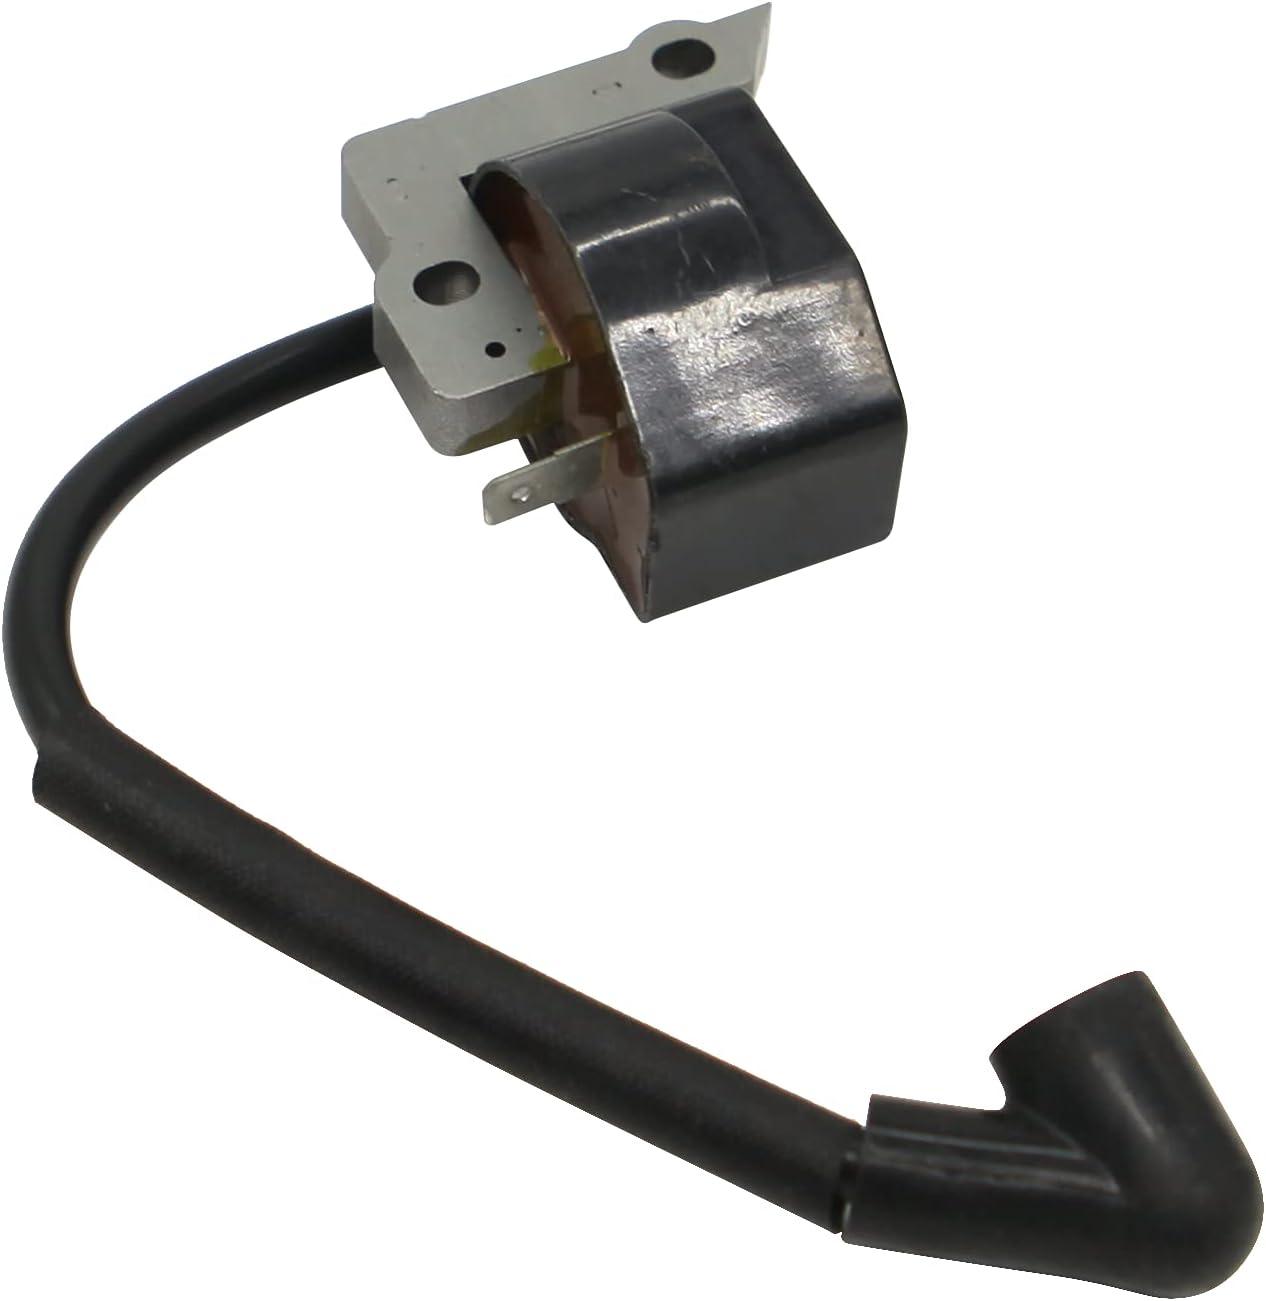 Hipa GA1872A Ignition Coil Compatible with Ryobi RY26901 RY28000 RY52604 String Trimmers Similar to 850108002 - hipaparts